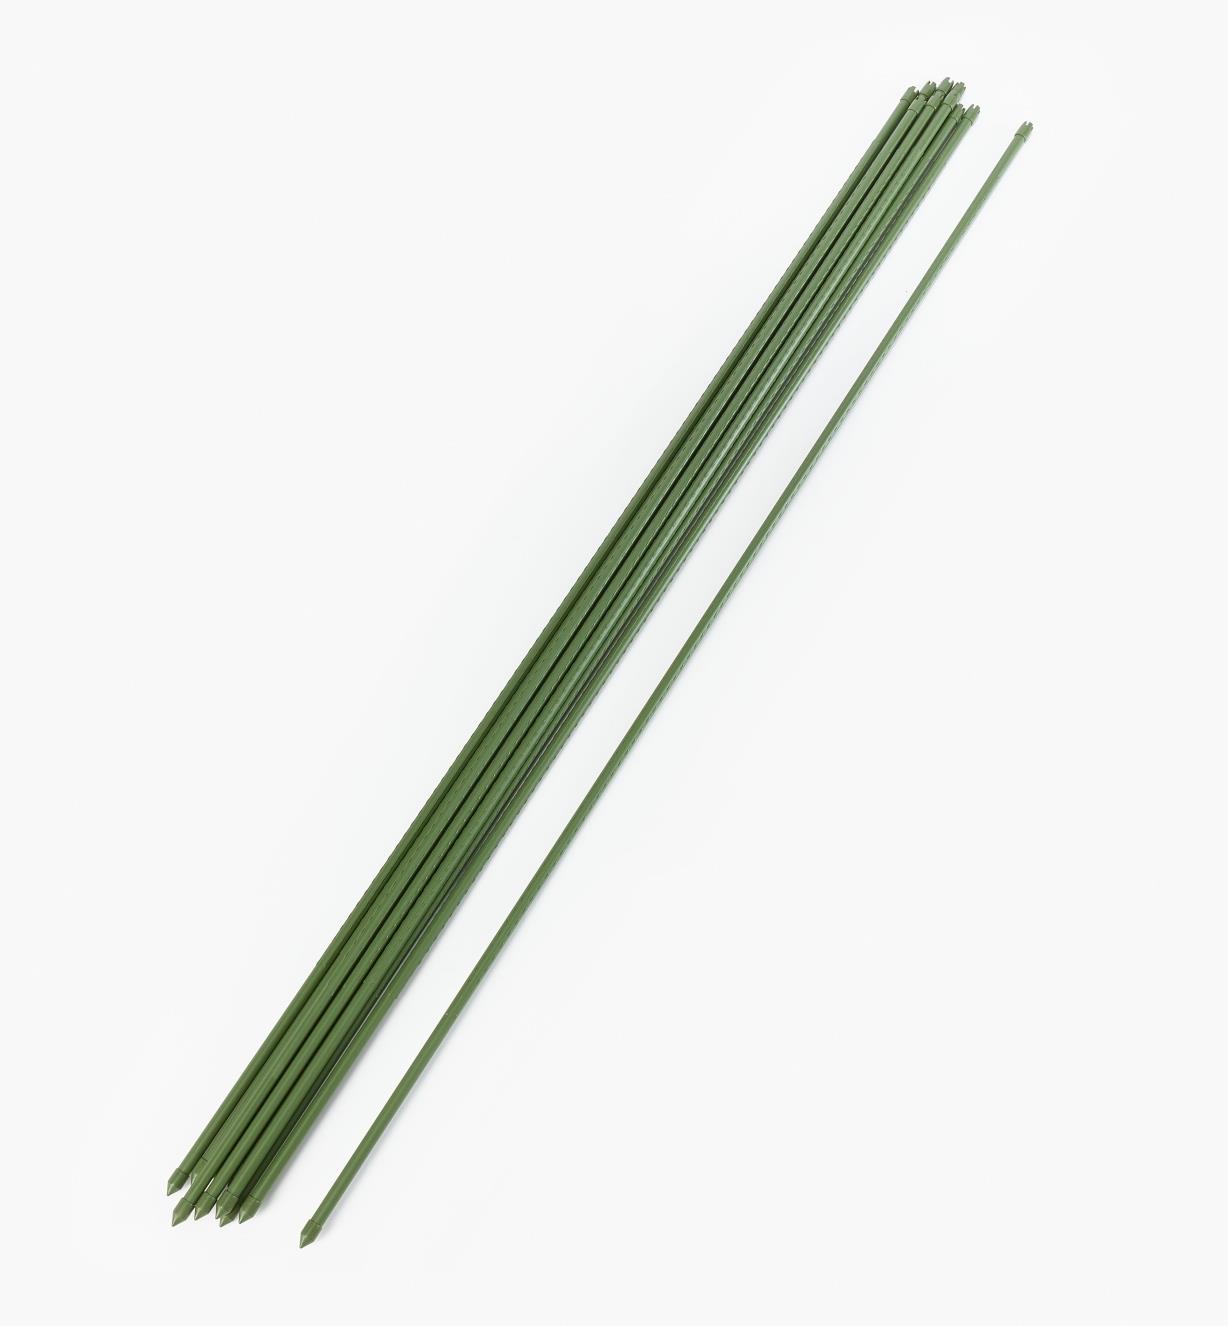 XM208 - 70" Permanent Stakes, pkg. of 10